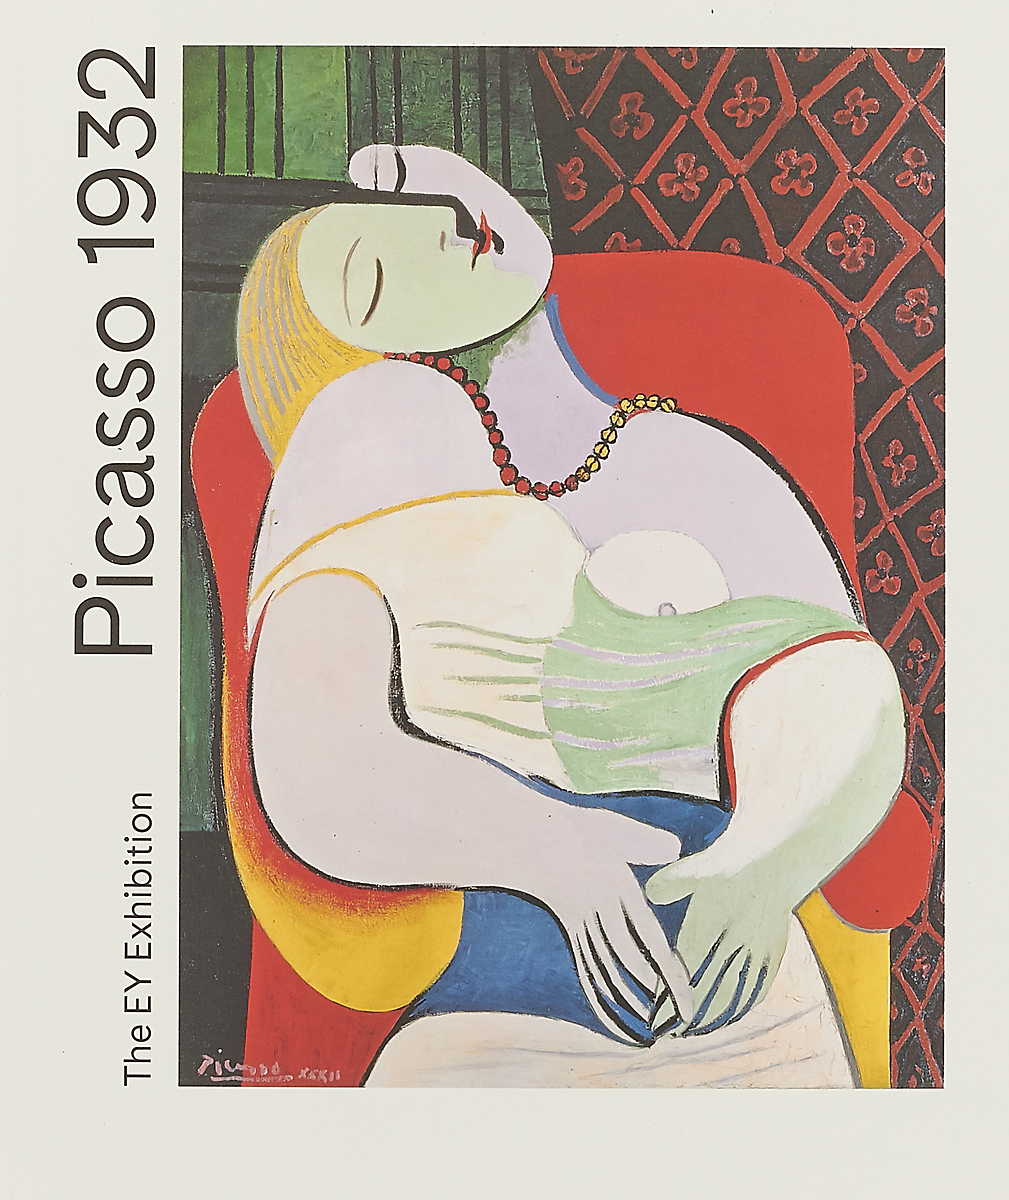 Picasso 1932: Love, Fame, Tragedy